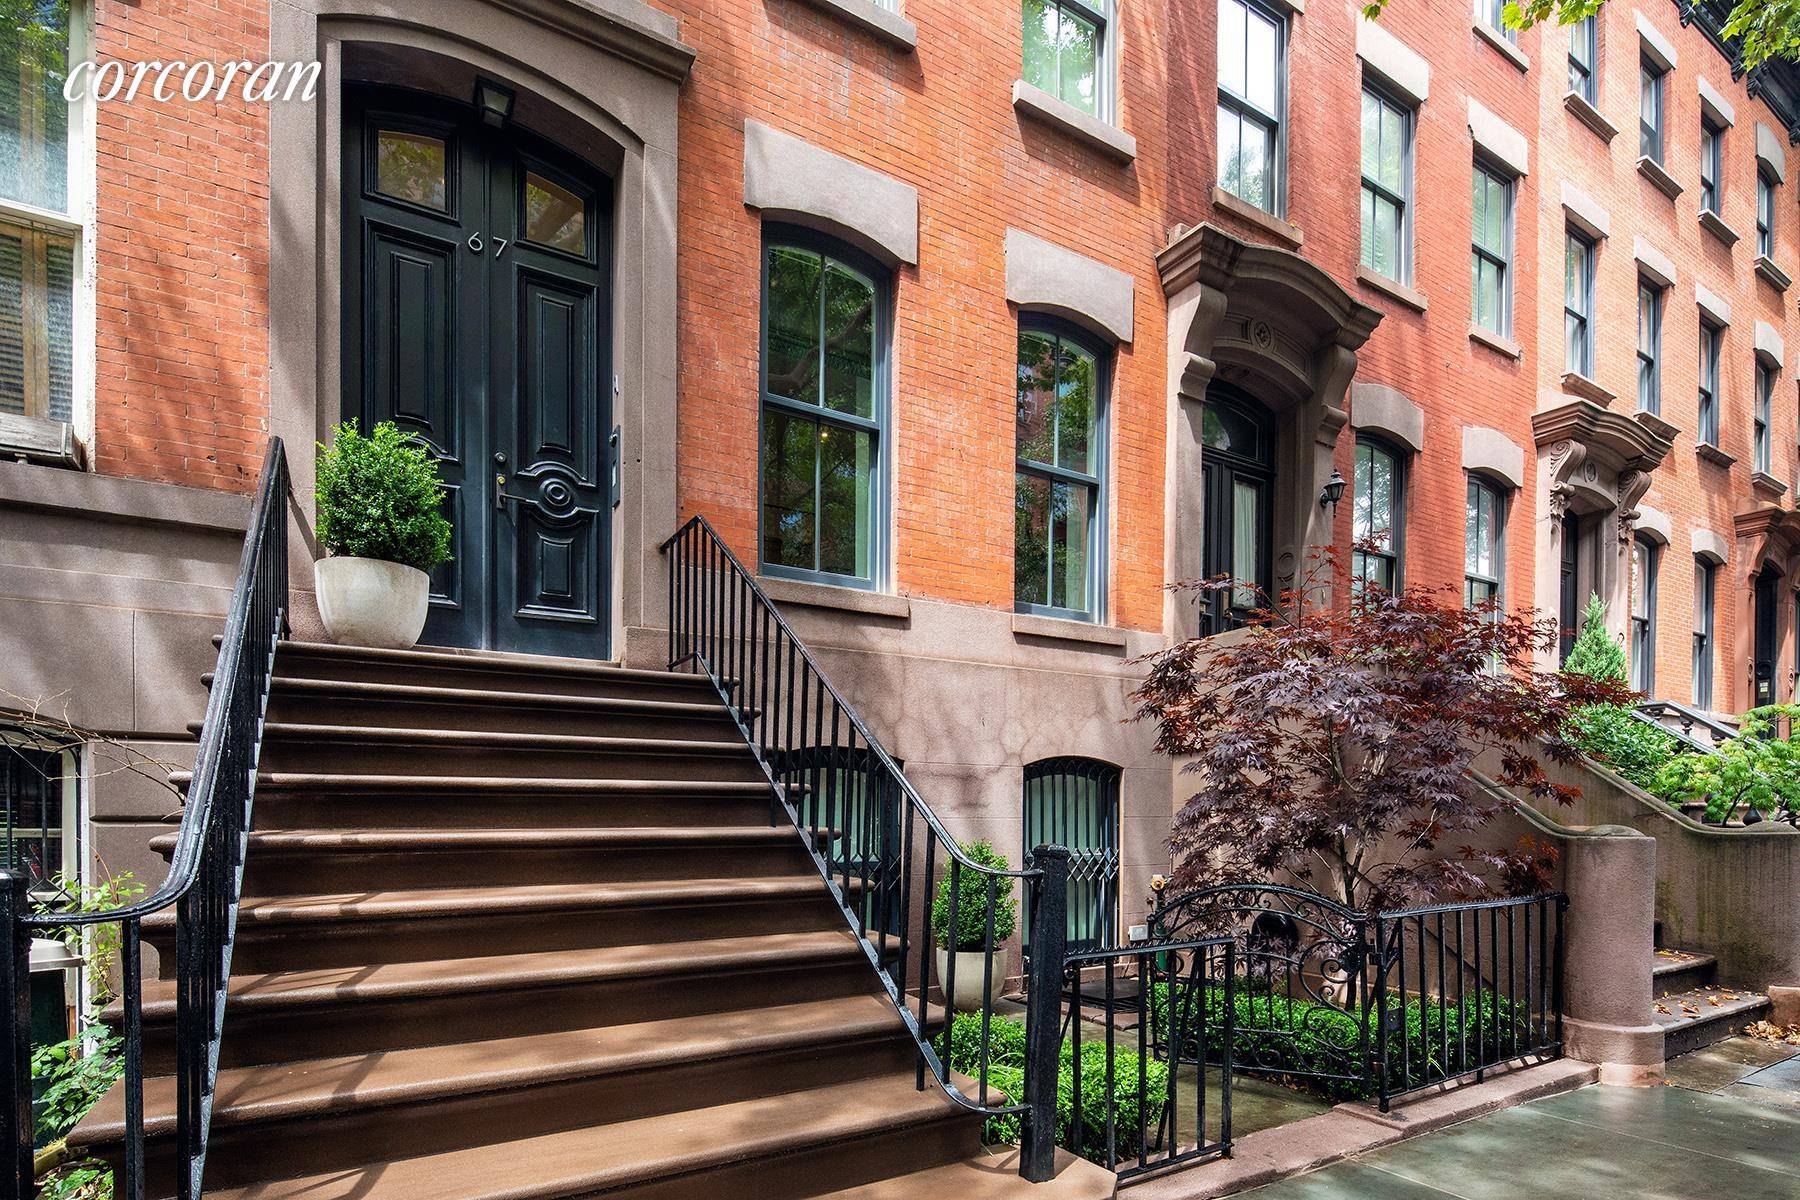 The four story townhouse at 67 Charles is situated on a charming tree lined block in the heart of the original Greenwich Village Historic District.